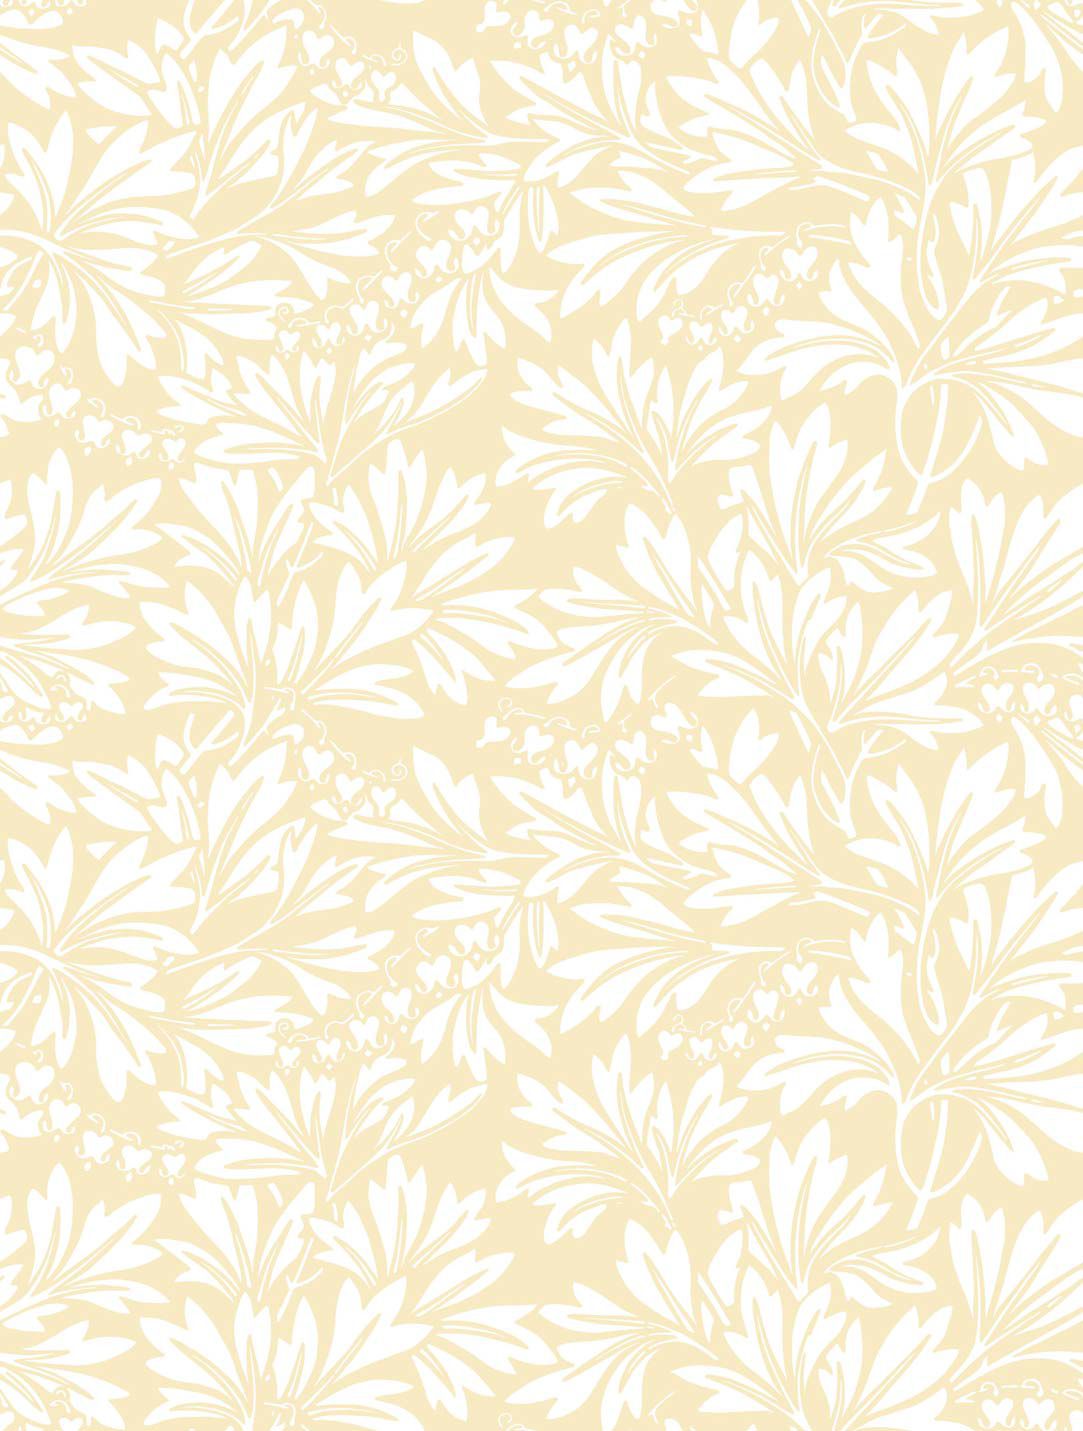 Nature pattern wallpaper / paper / traditional - ARCHIVE ...